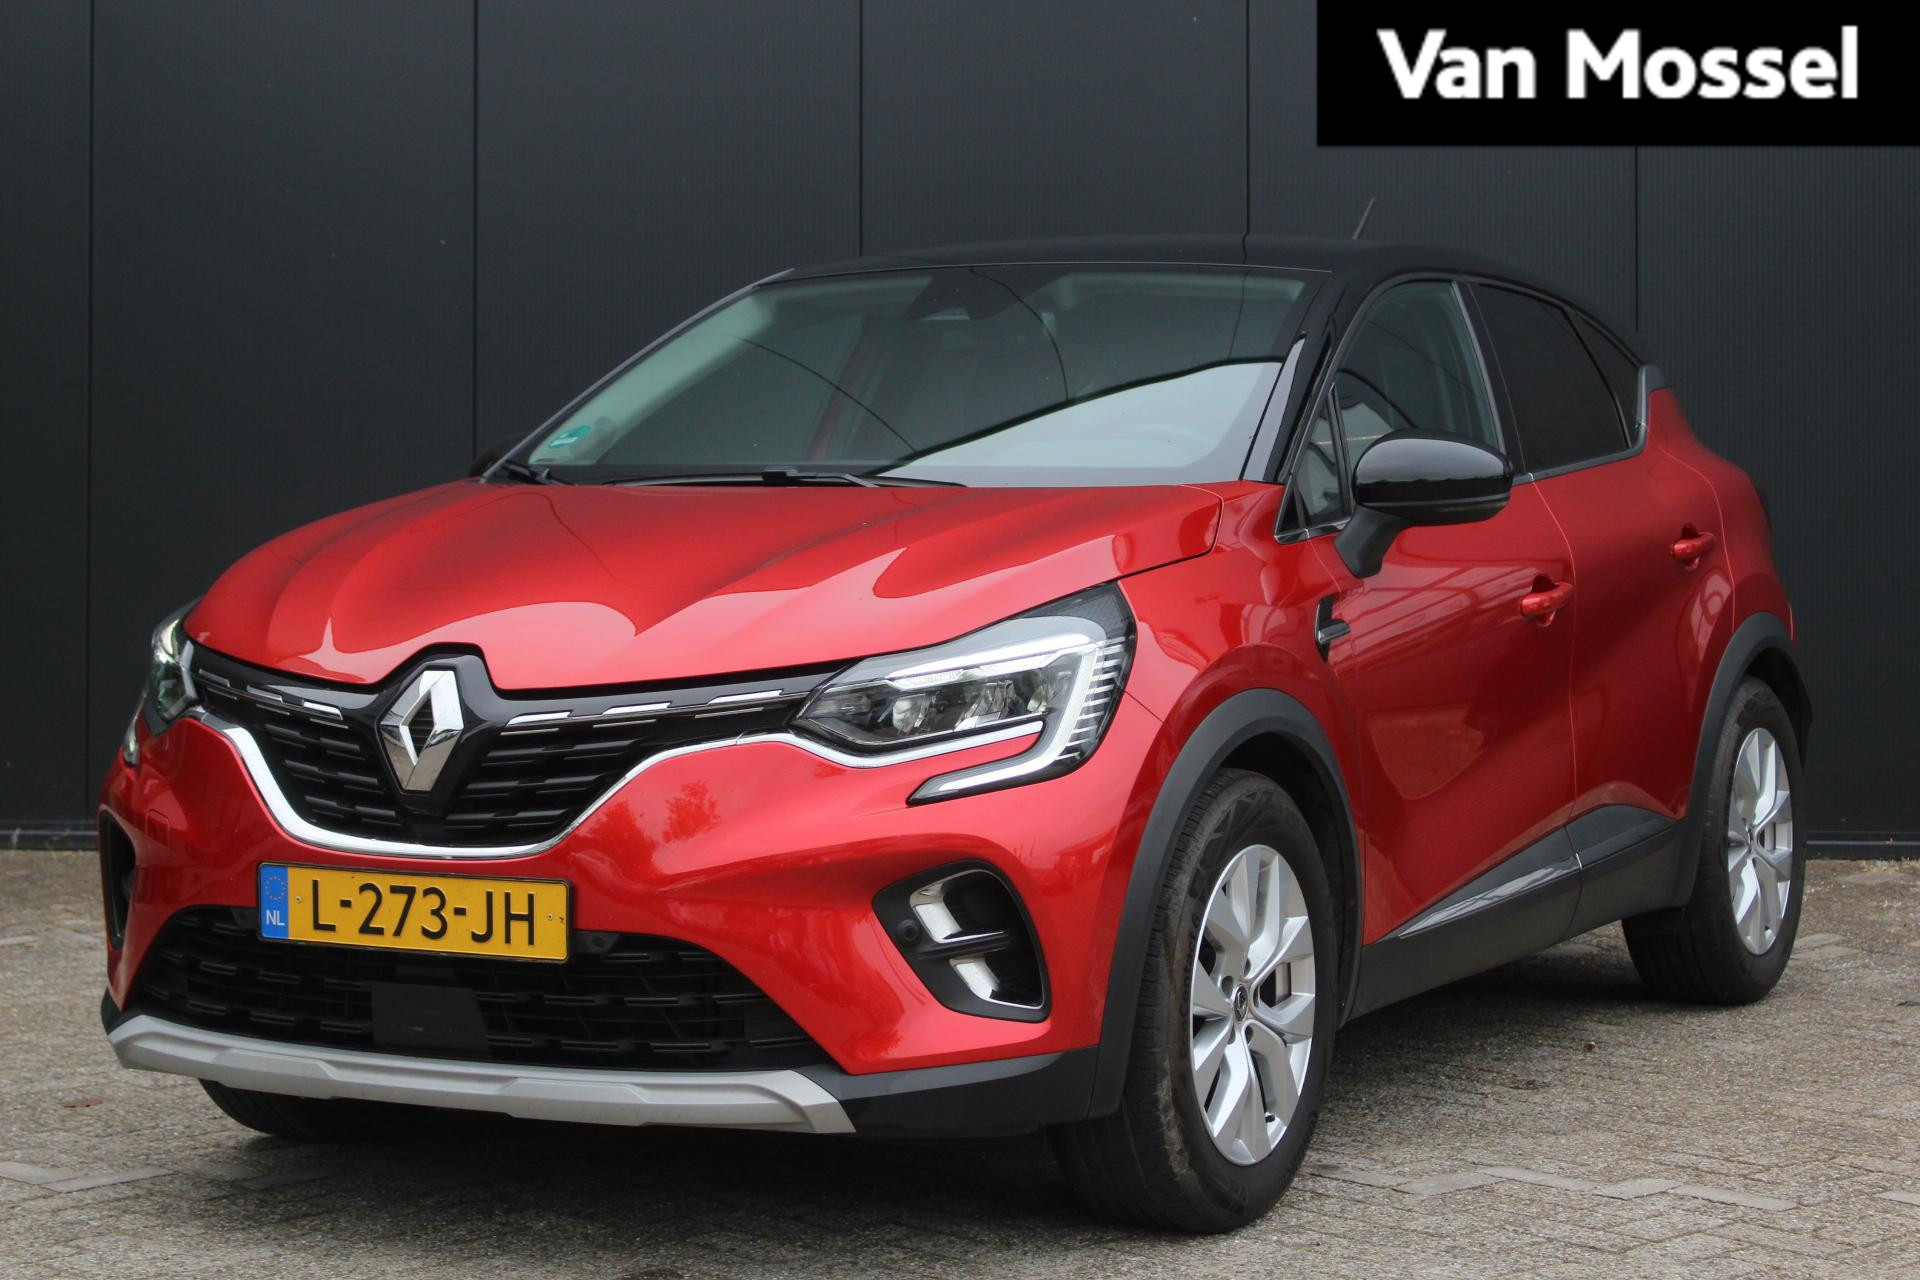 Renault Captur 1.0 TCe 90Pk Intens | Navigatie | Apple & Android Carplay | Parkeersensoren Voor & Achter | Climate Control | Privacy Glass | Cruise Control | Keyless Entry | Full LED Verlichting |